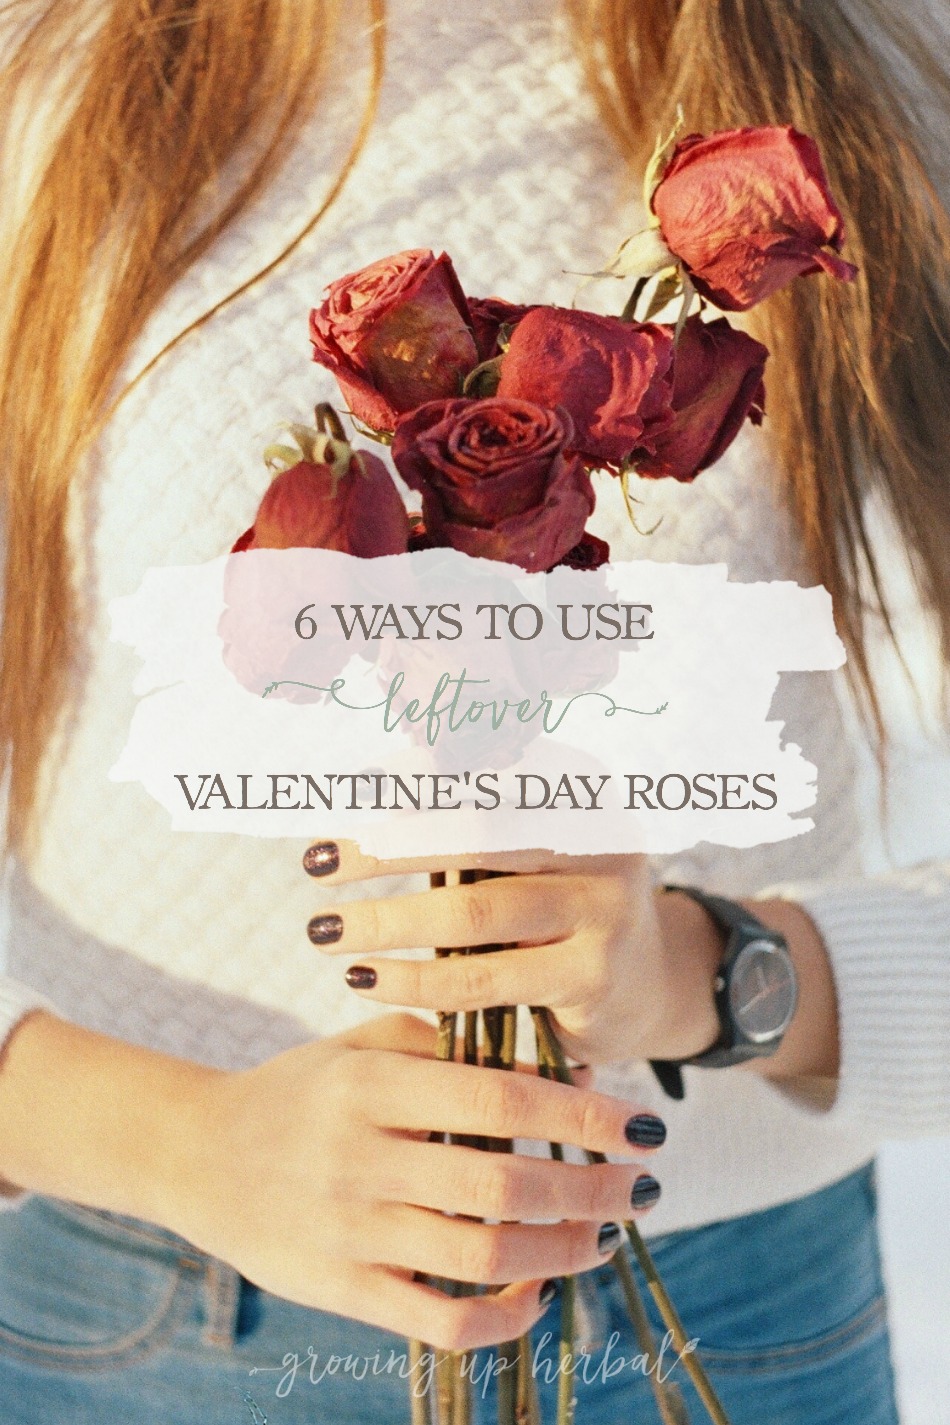 6 Ways To Use Leftover Valentine’s Day Roses | Growing Up Herbal | Don’t throw your roses away after Valentine’s Day. Here are some ways to put leftover Valentine’s Day roses to good use!